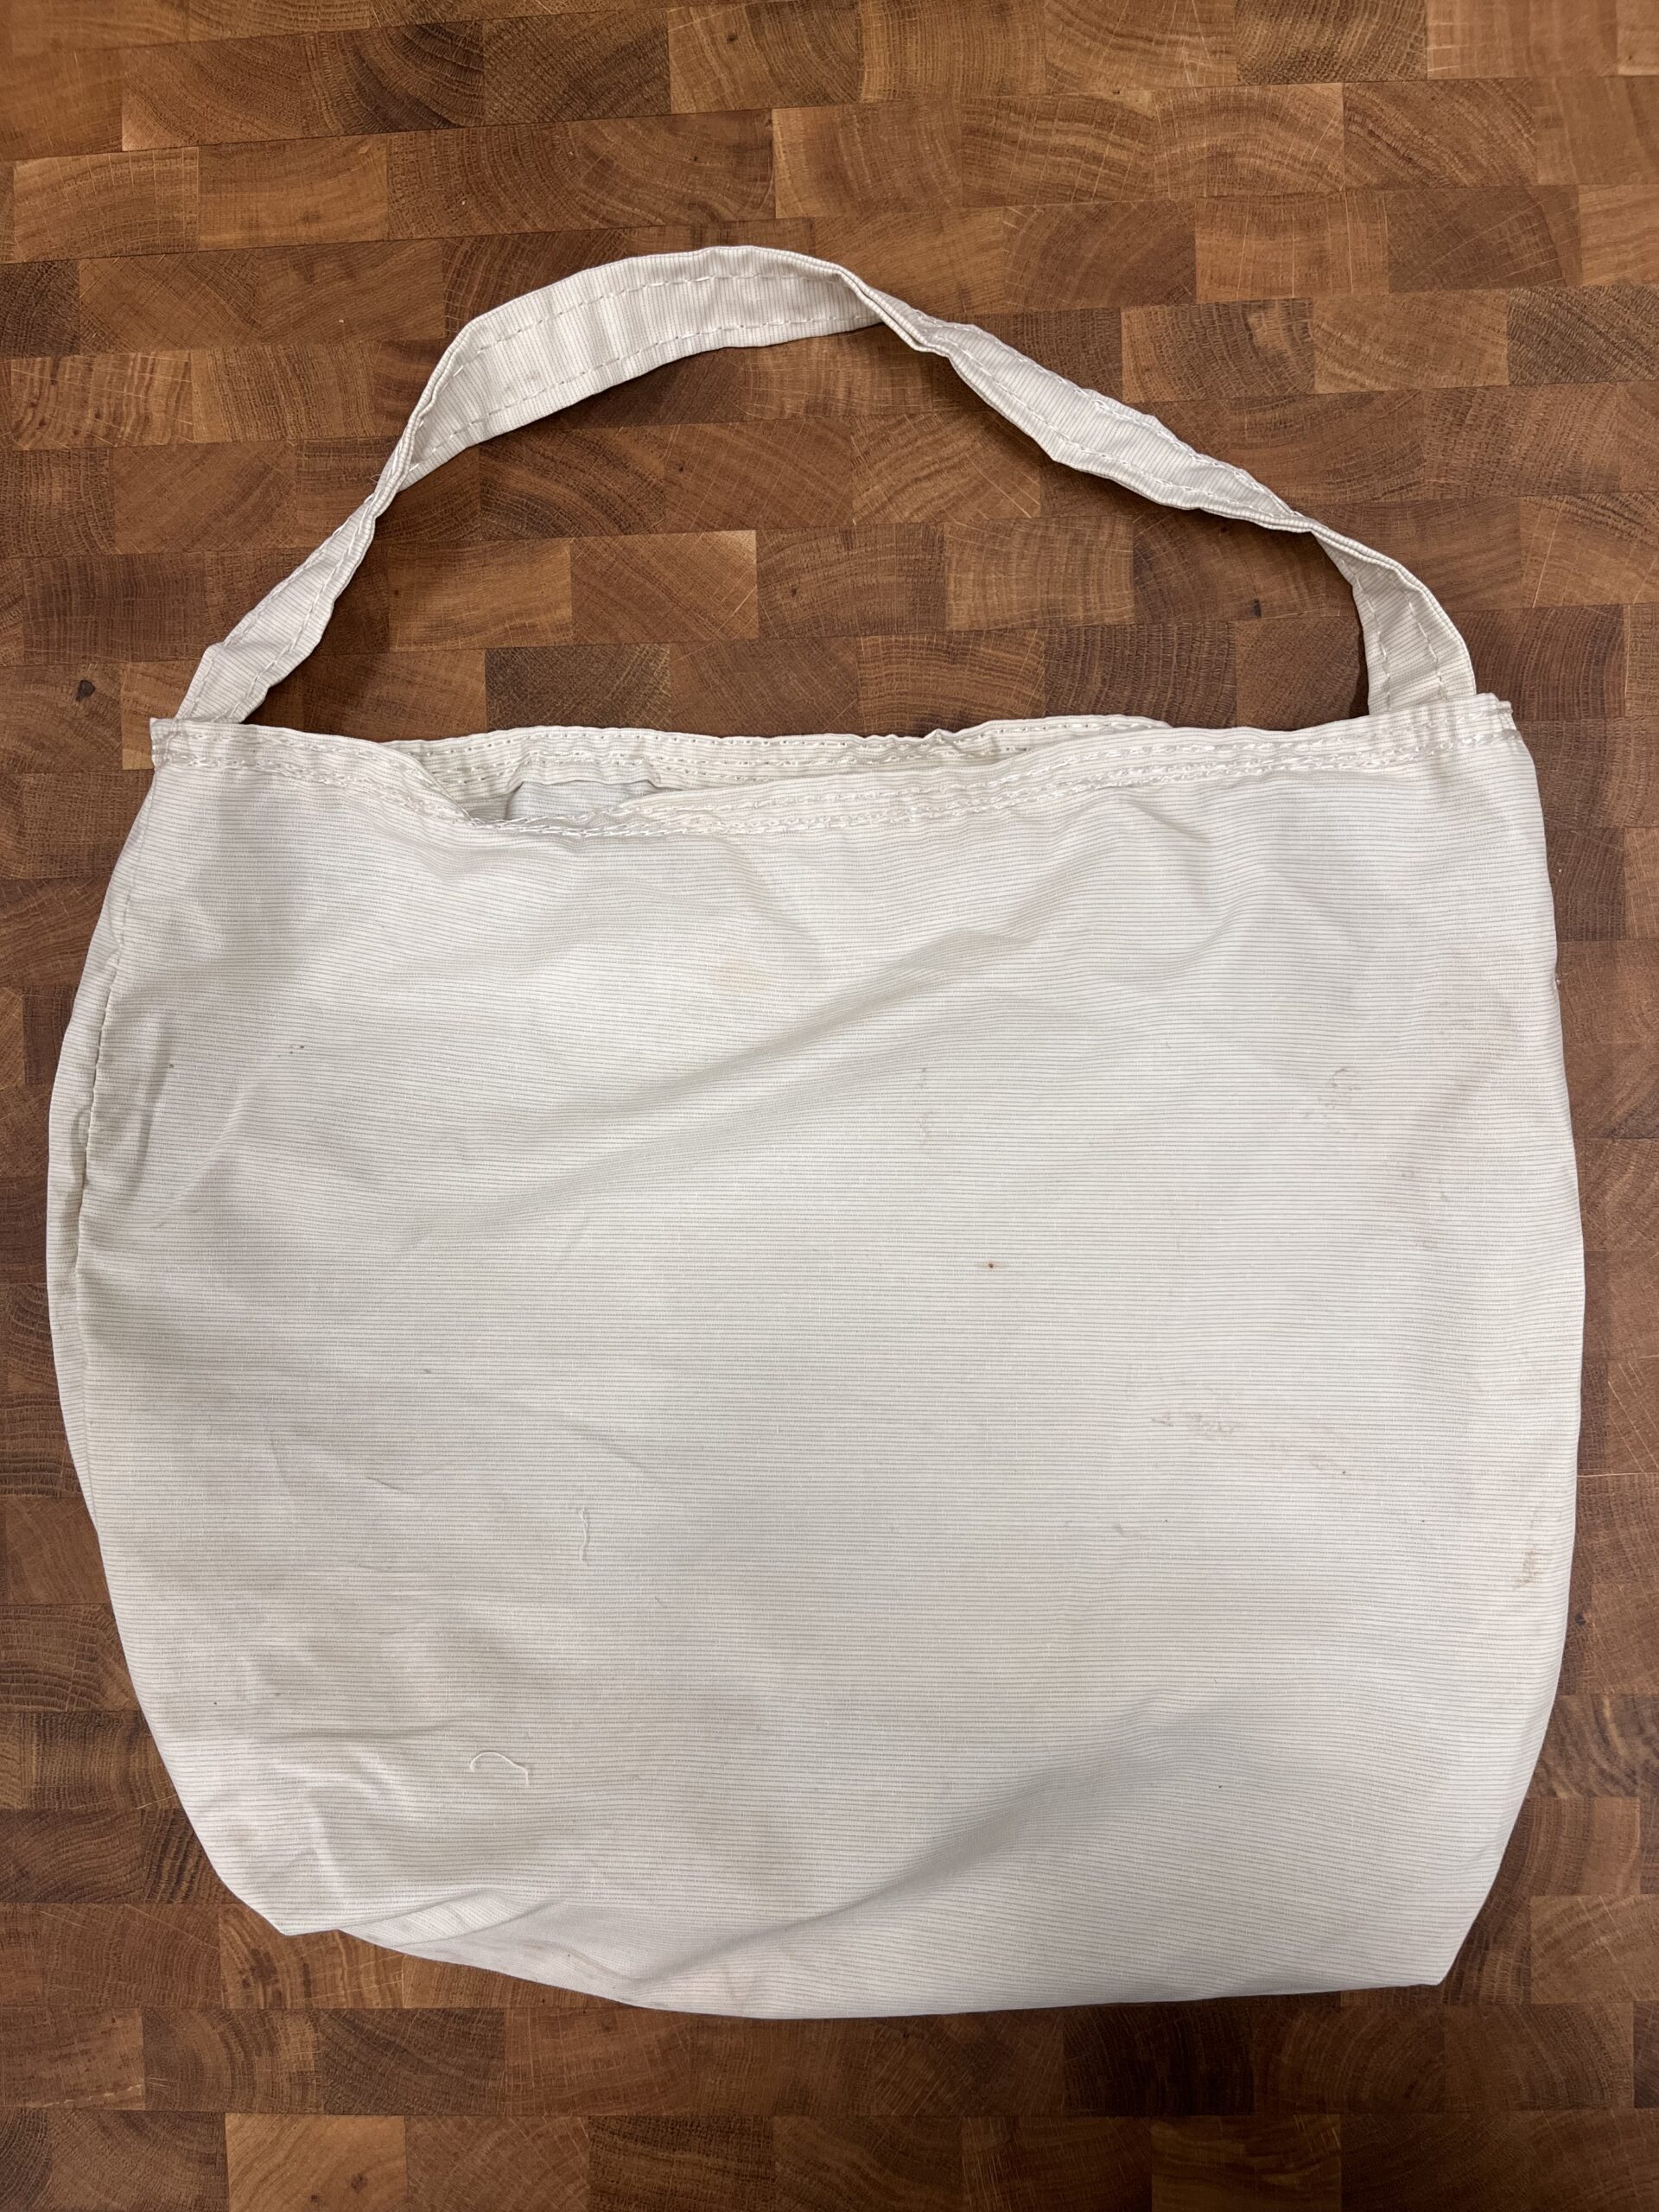 13x14" Cotton Bag with Handles